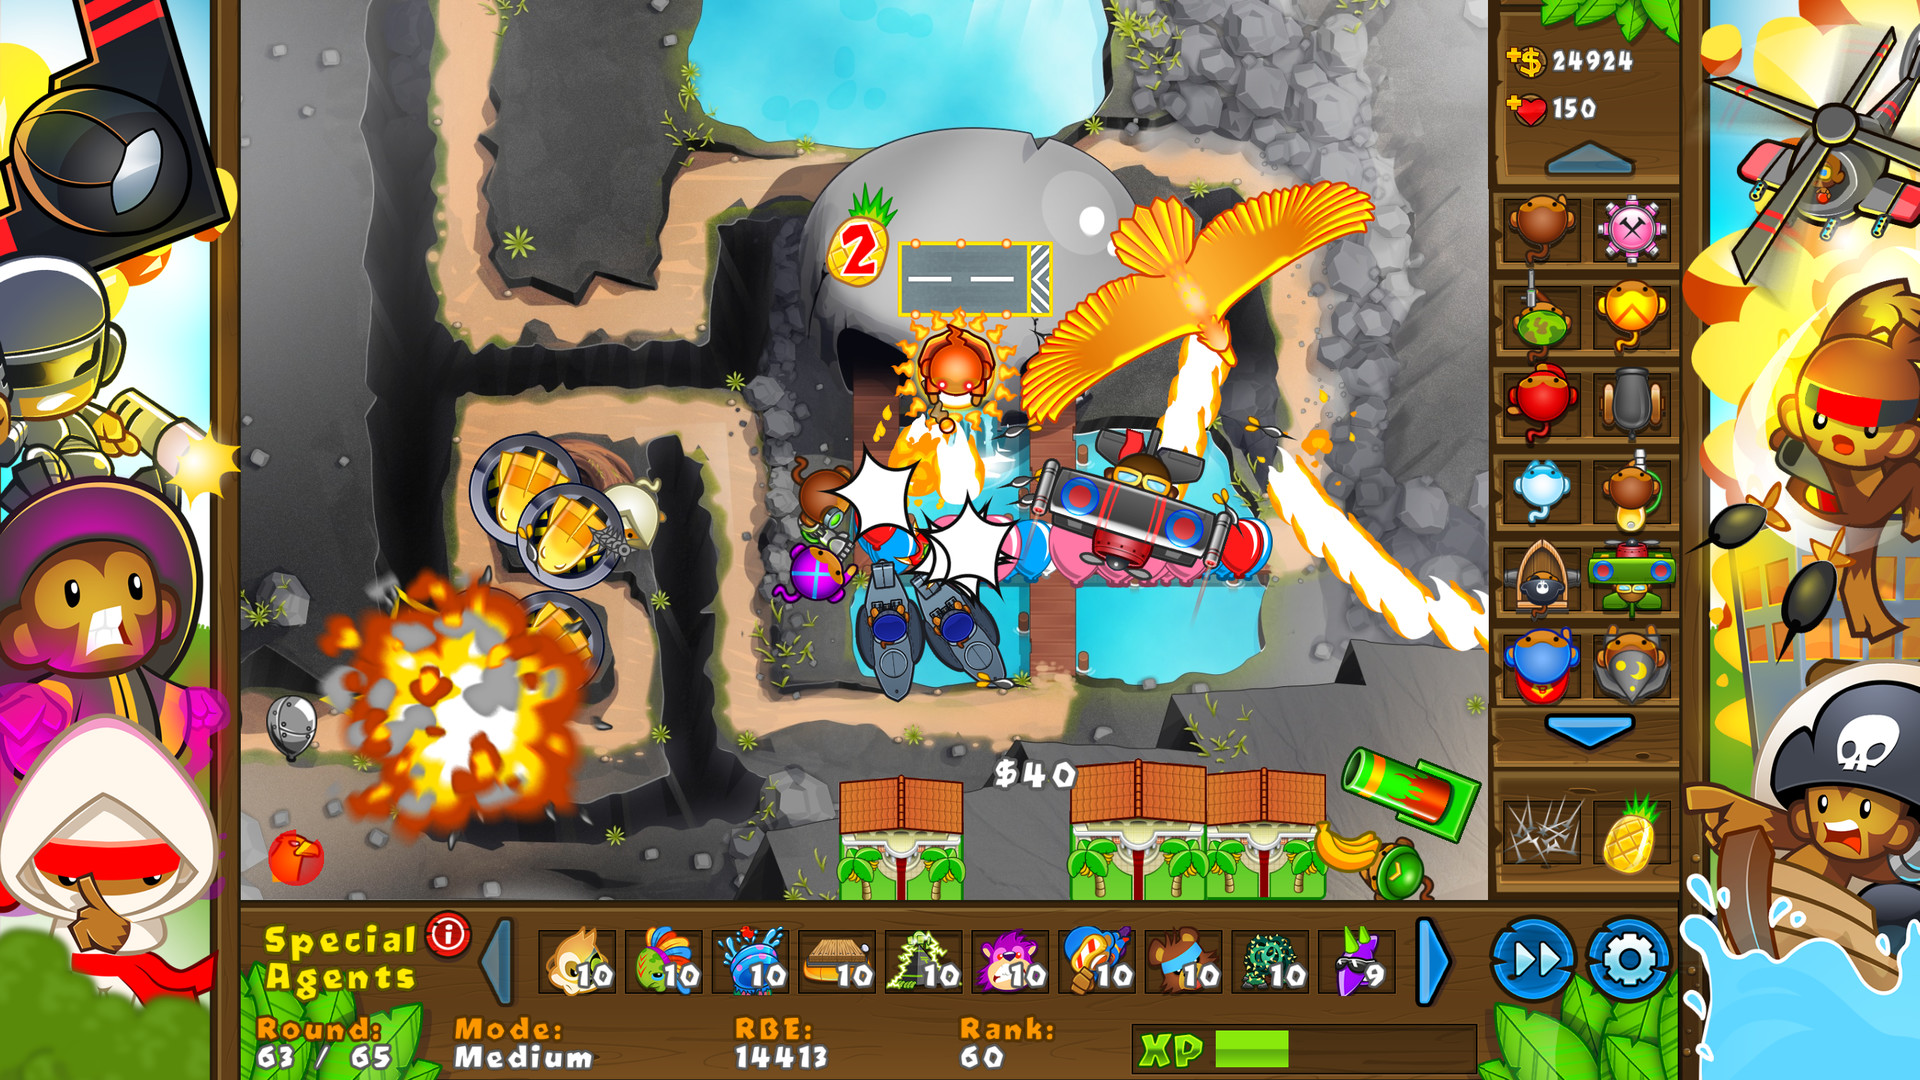 Download Bloons Td 5 Full Pc Game